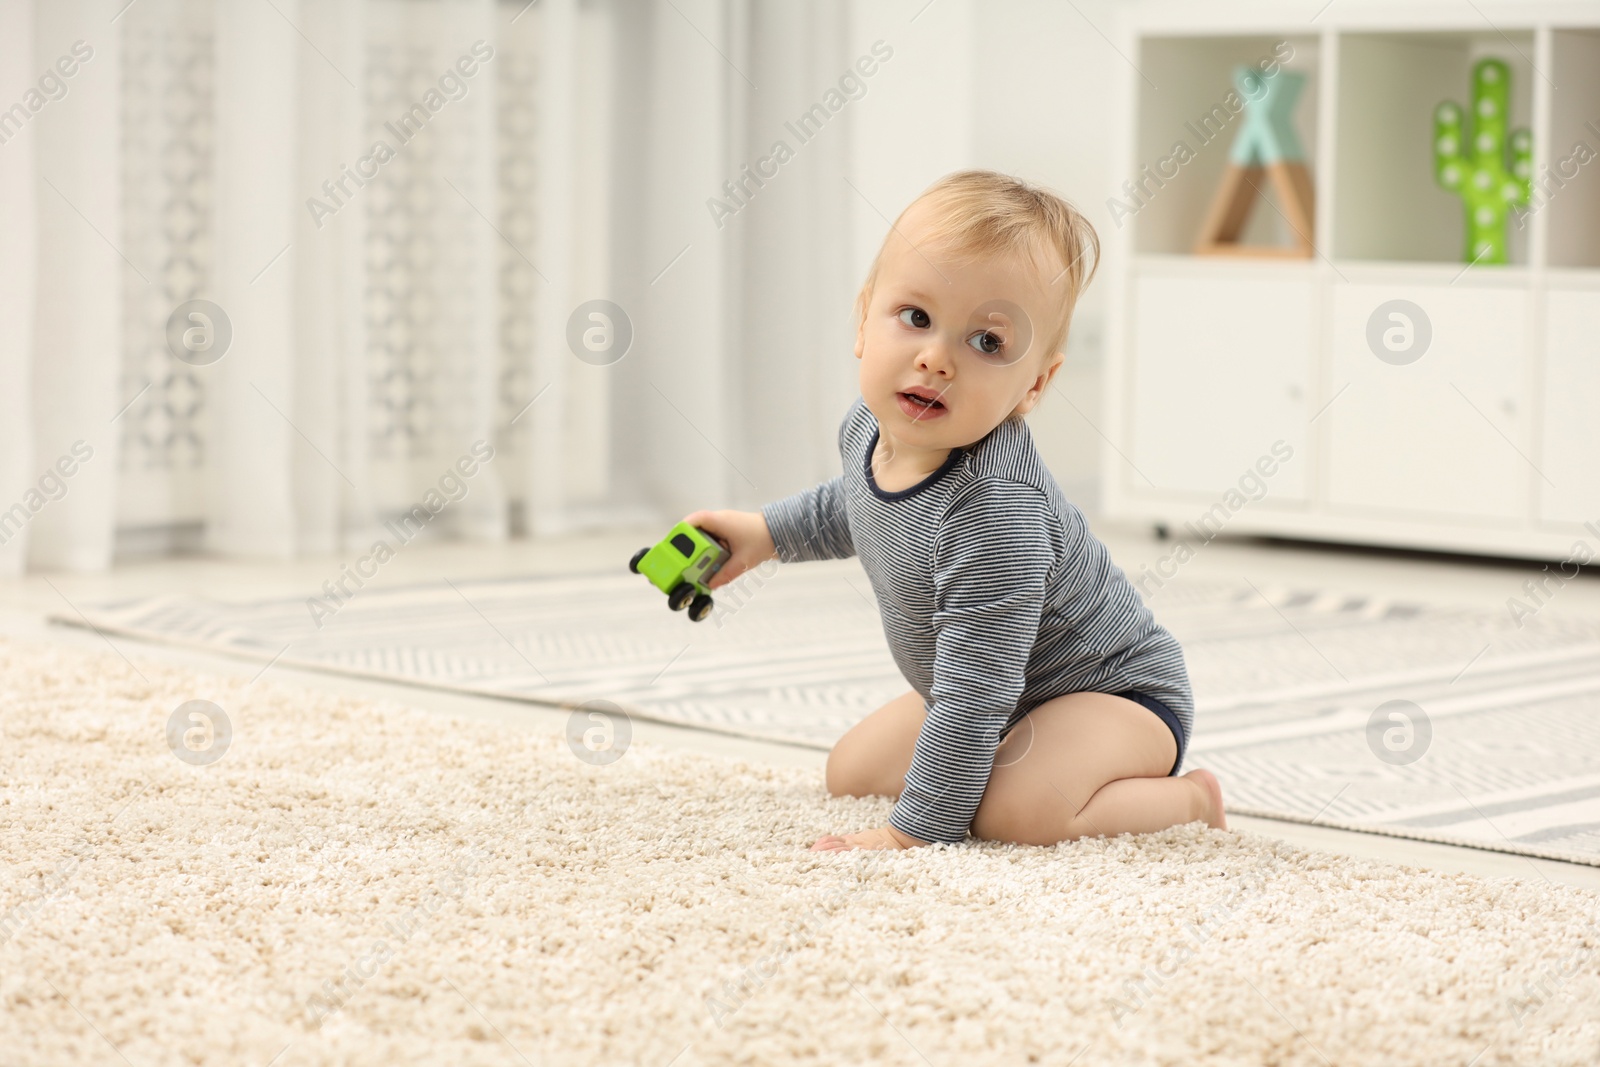 Photo of Children toys. Cute little boy with toy car on rug at home, space for text